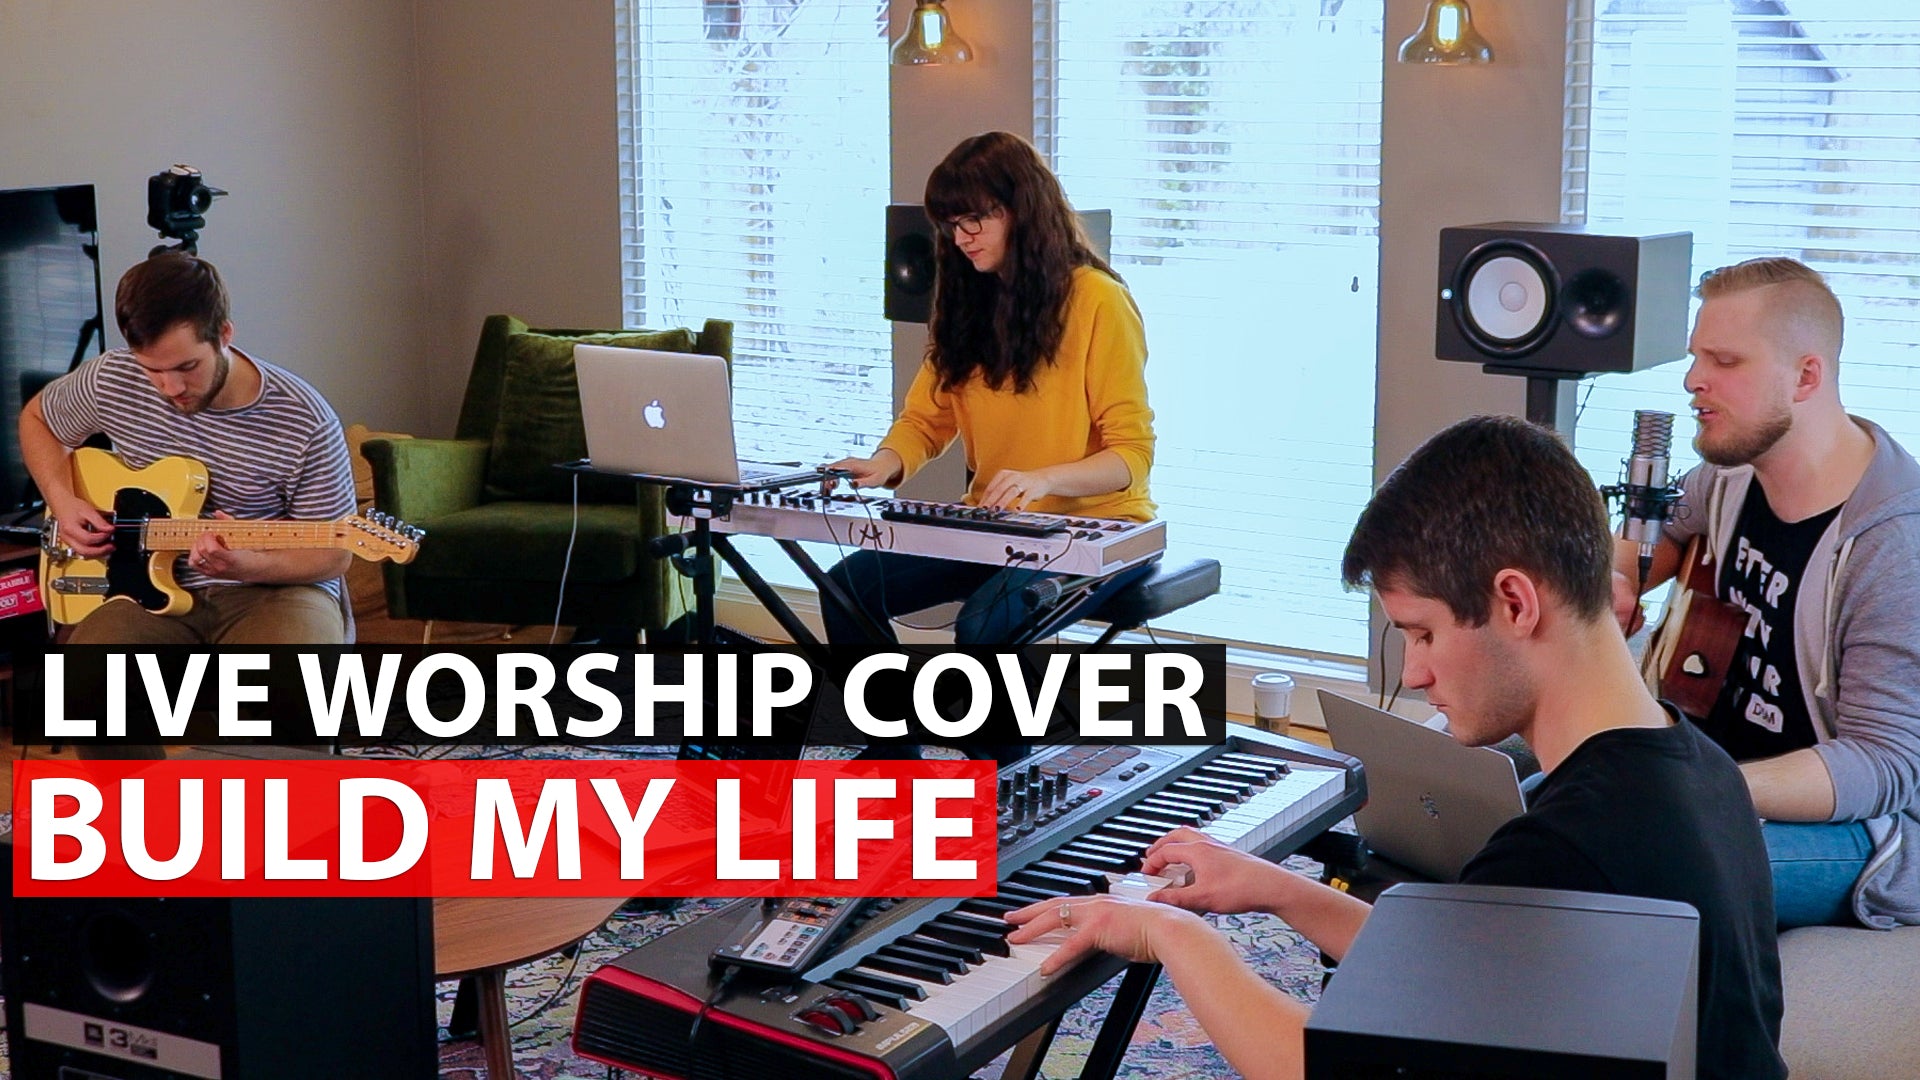 Build My Life - Live Worship Cover by Team Sunday Sounds